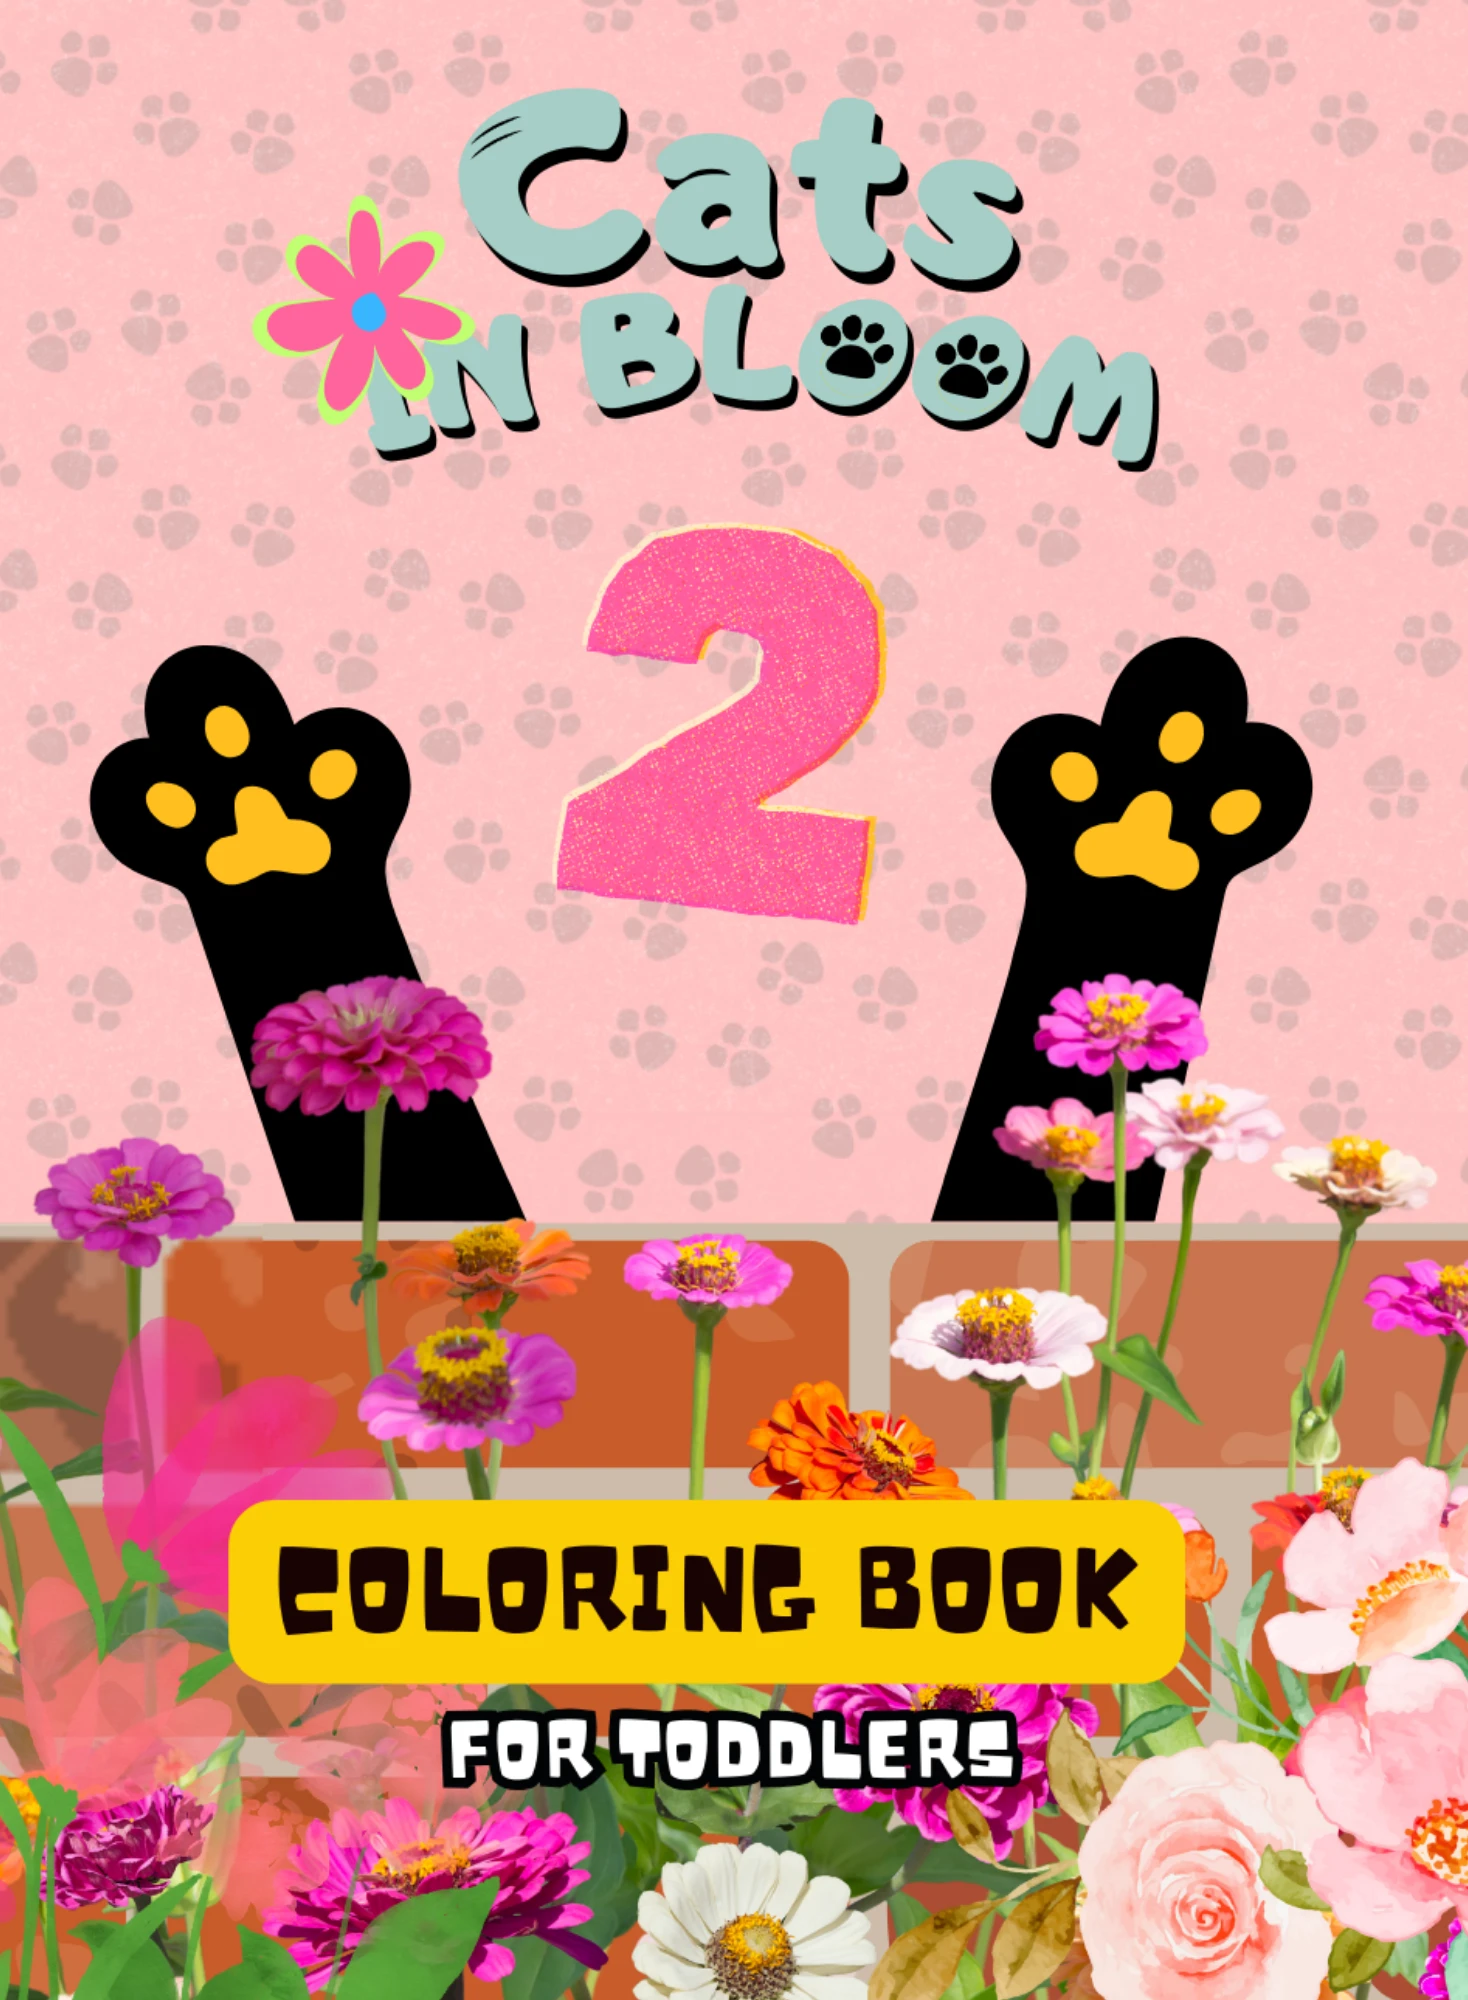 Cats In Bloom Coloring Book